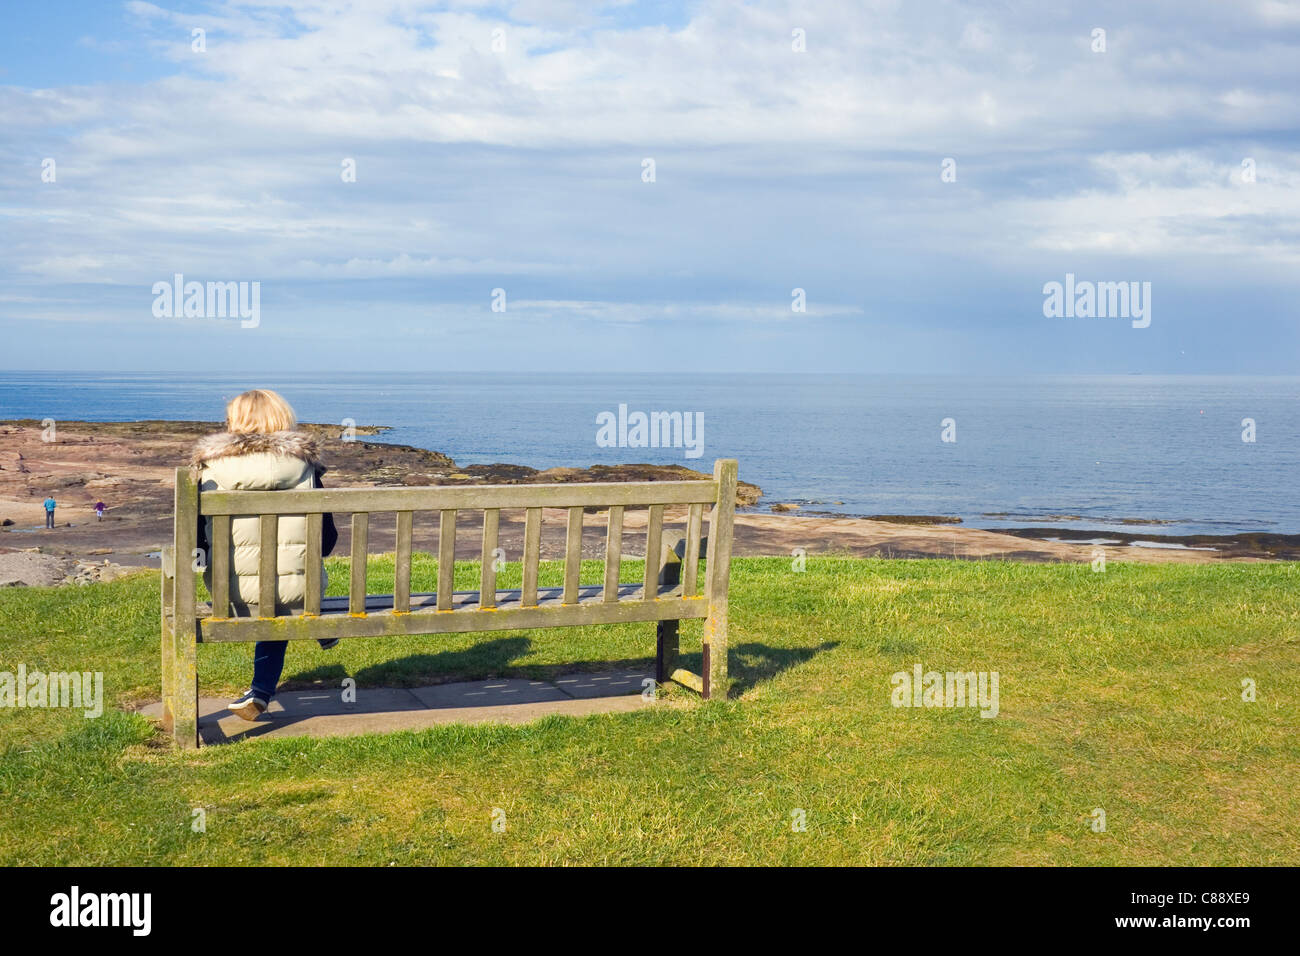 Solitary woman sitting on a bench overlooking the beach. Seahouses, Northumberland Coast, England. Stock Photo